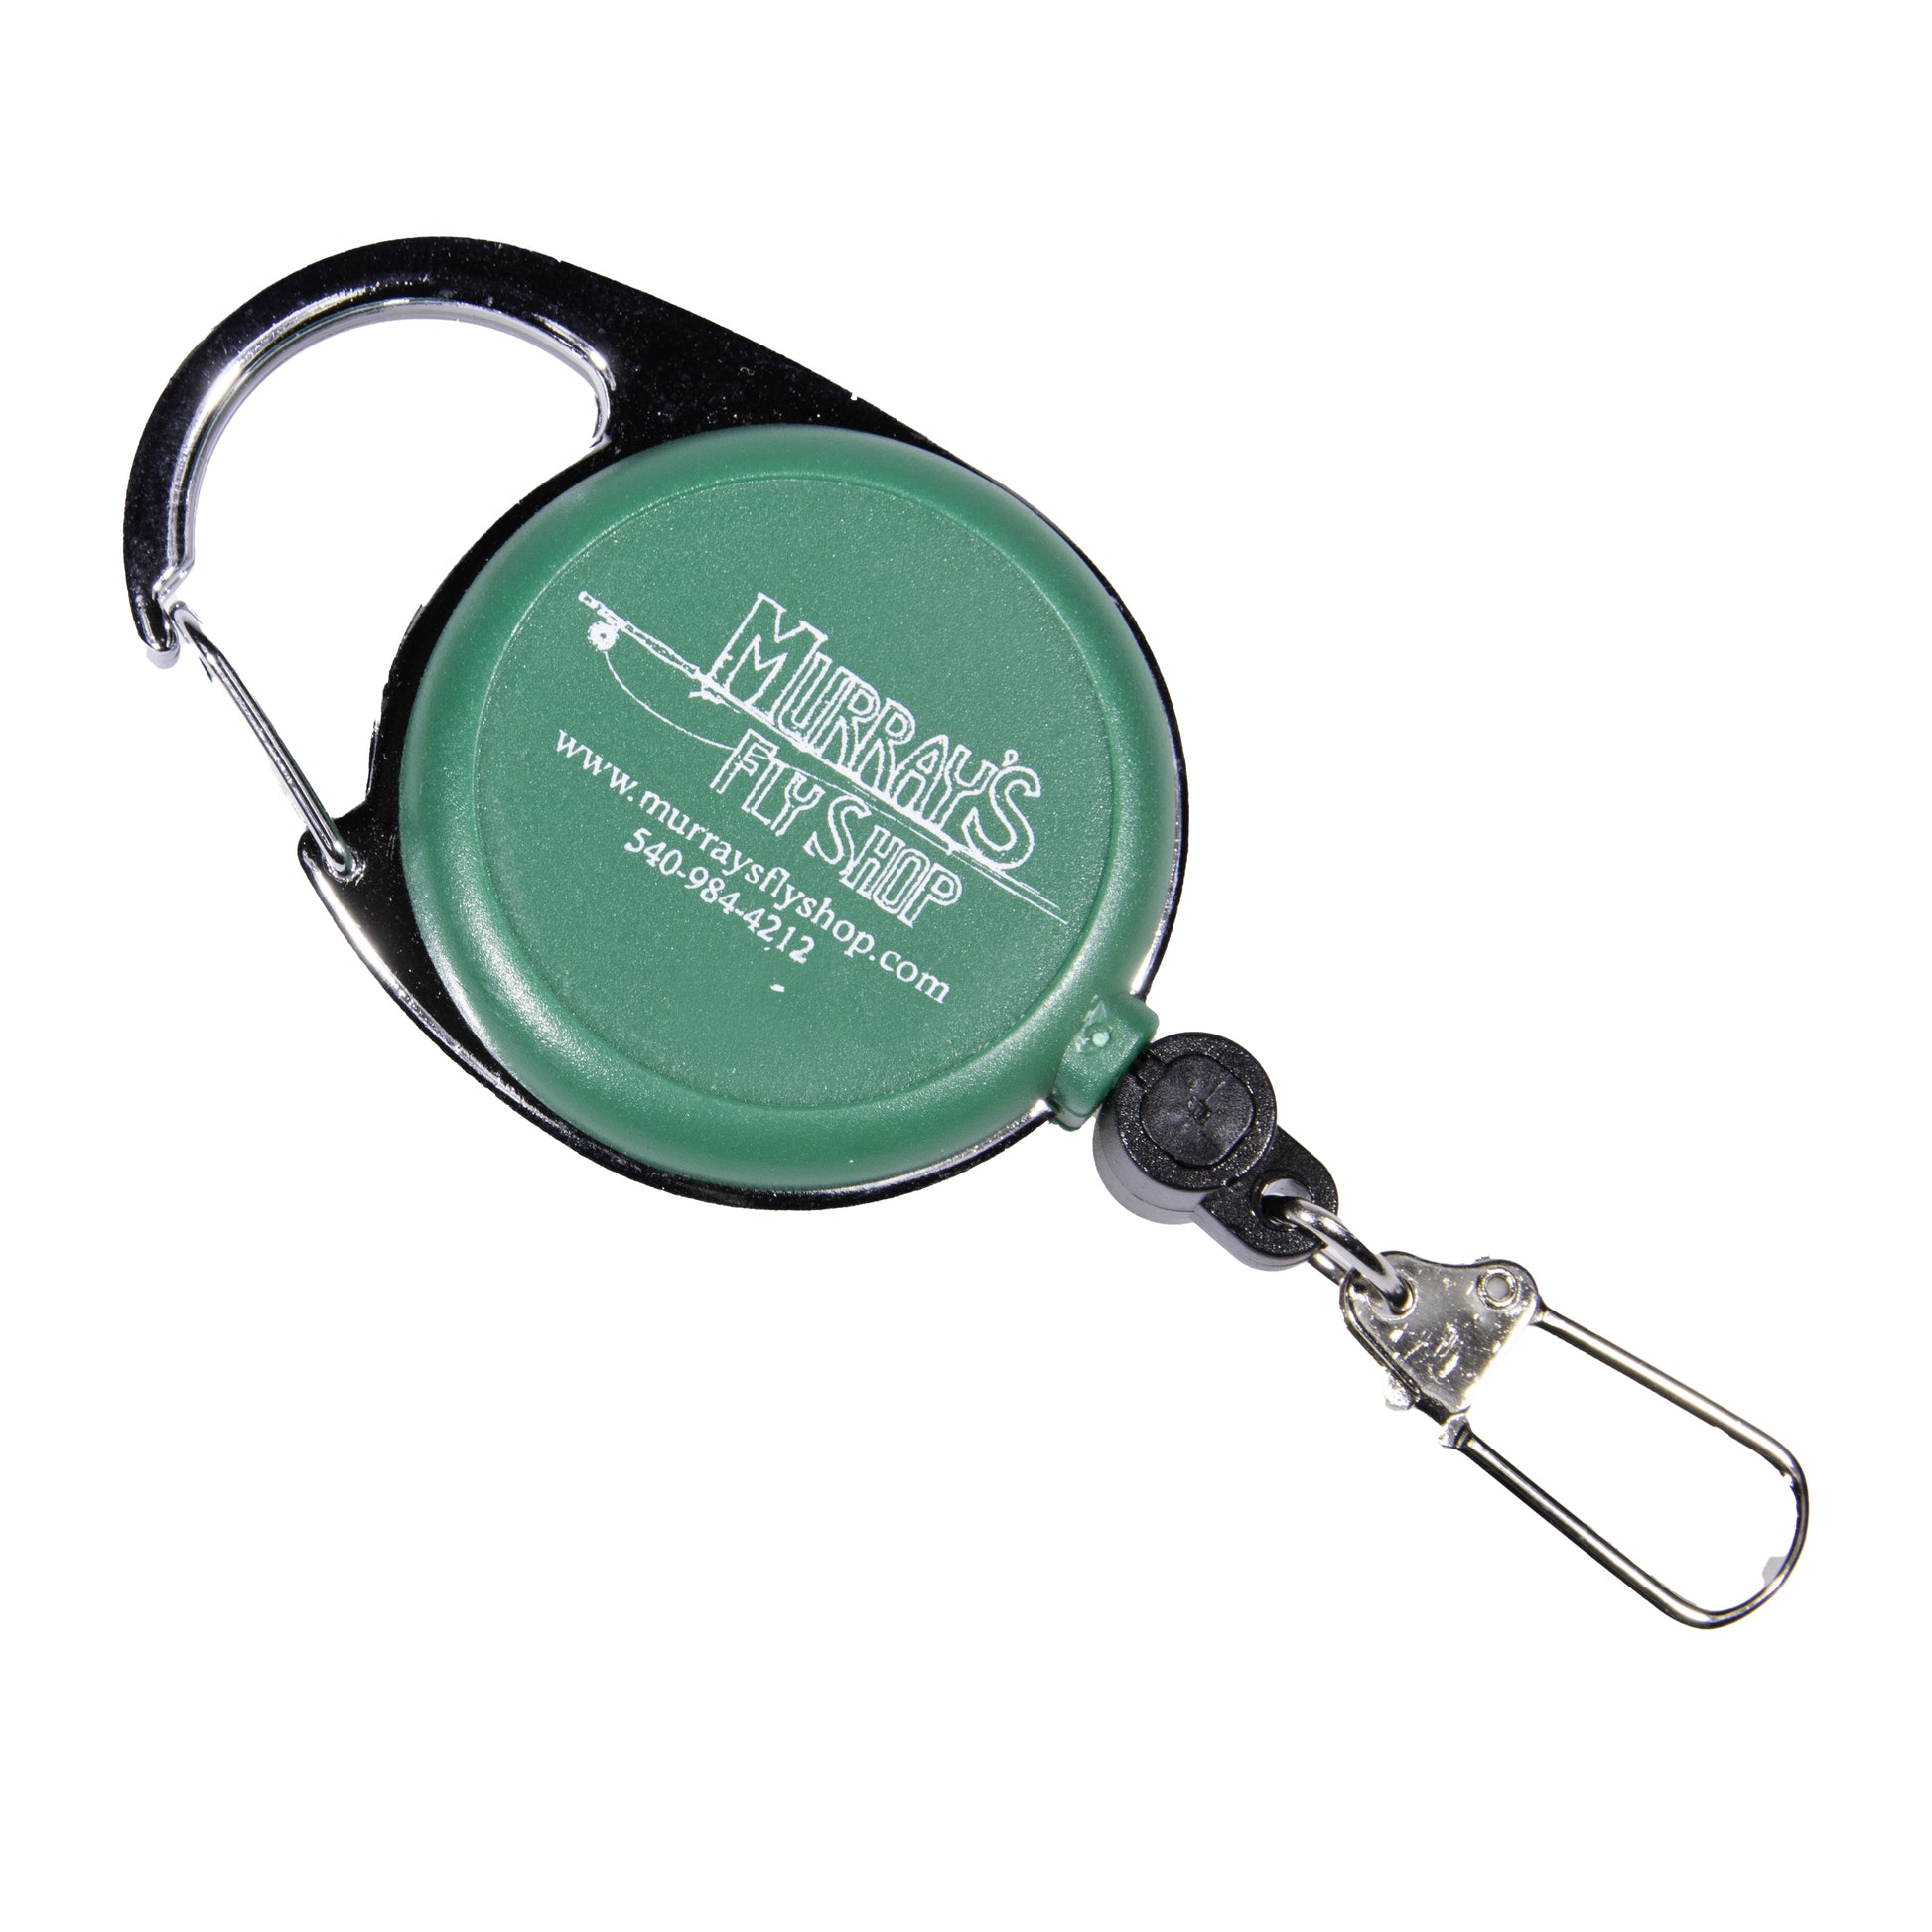 Murray's Fly Shop Zinger with Tape Measure - fishing tool retractor 